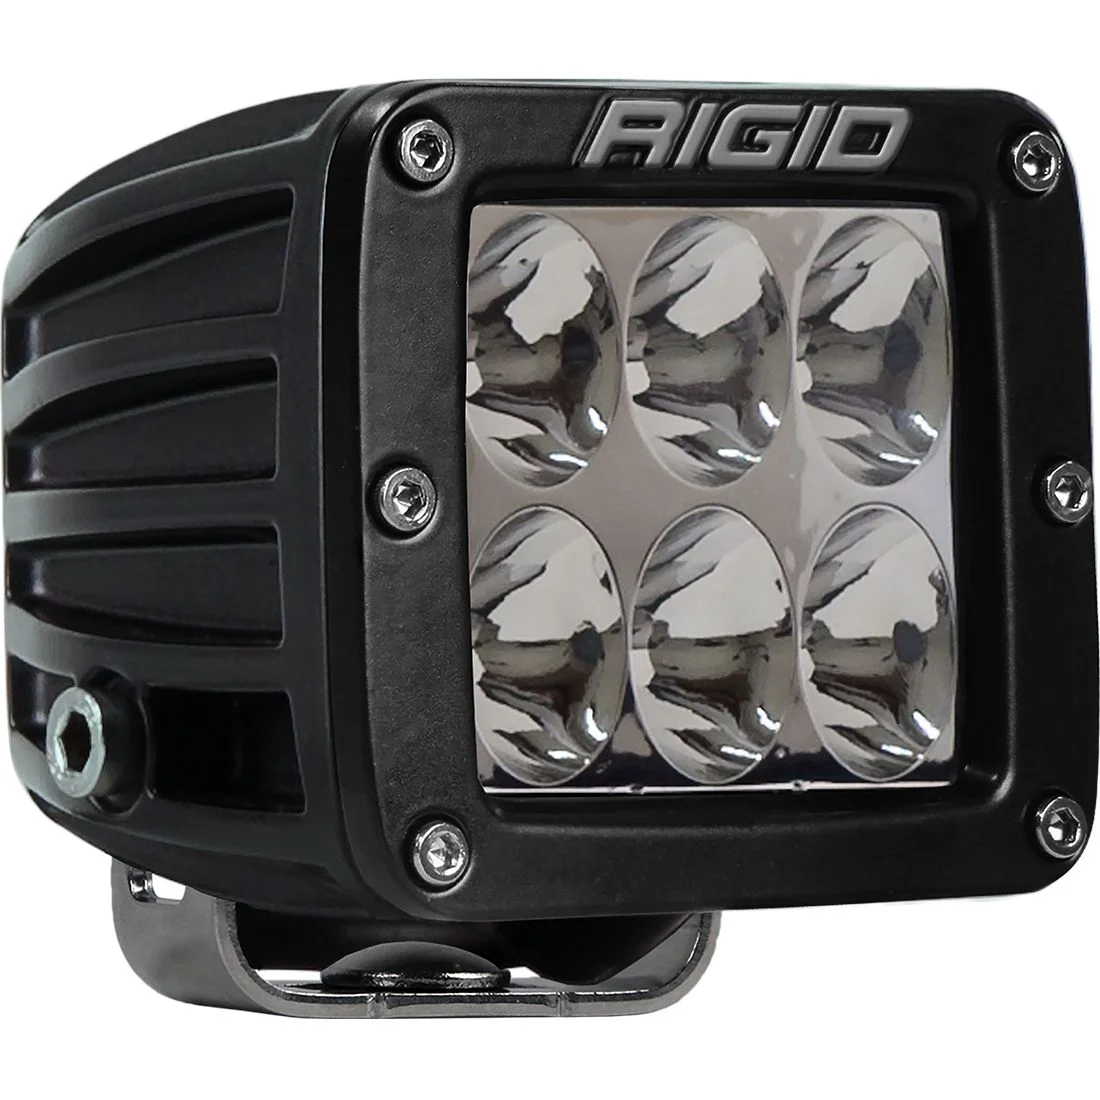 SINGLE Rigid D-Series PRO OFFROAD Surface Mount Light Pods (SOLD IN SINGLES)